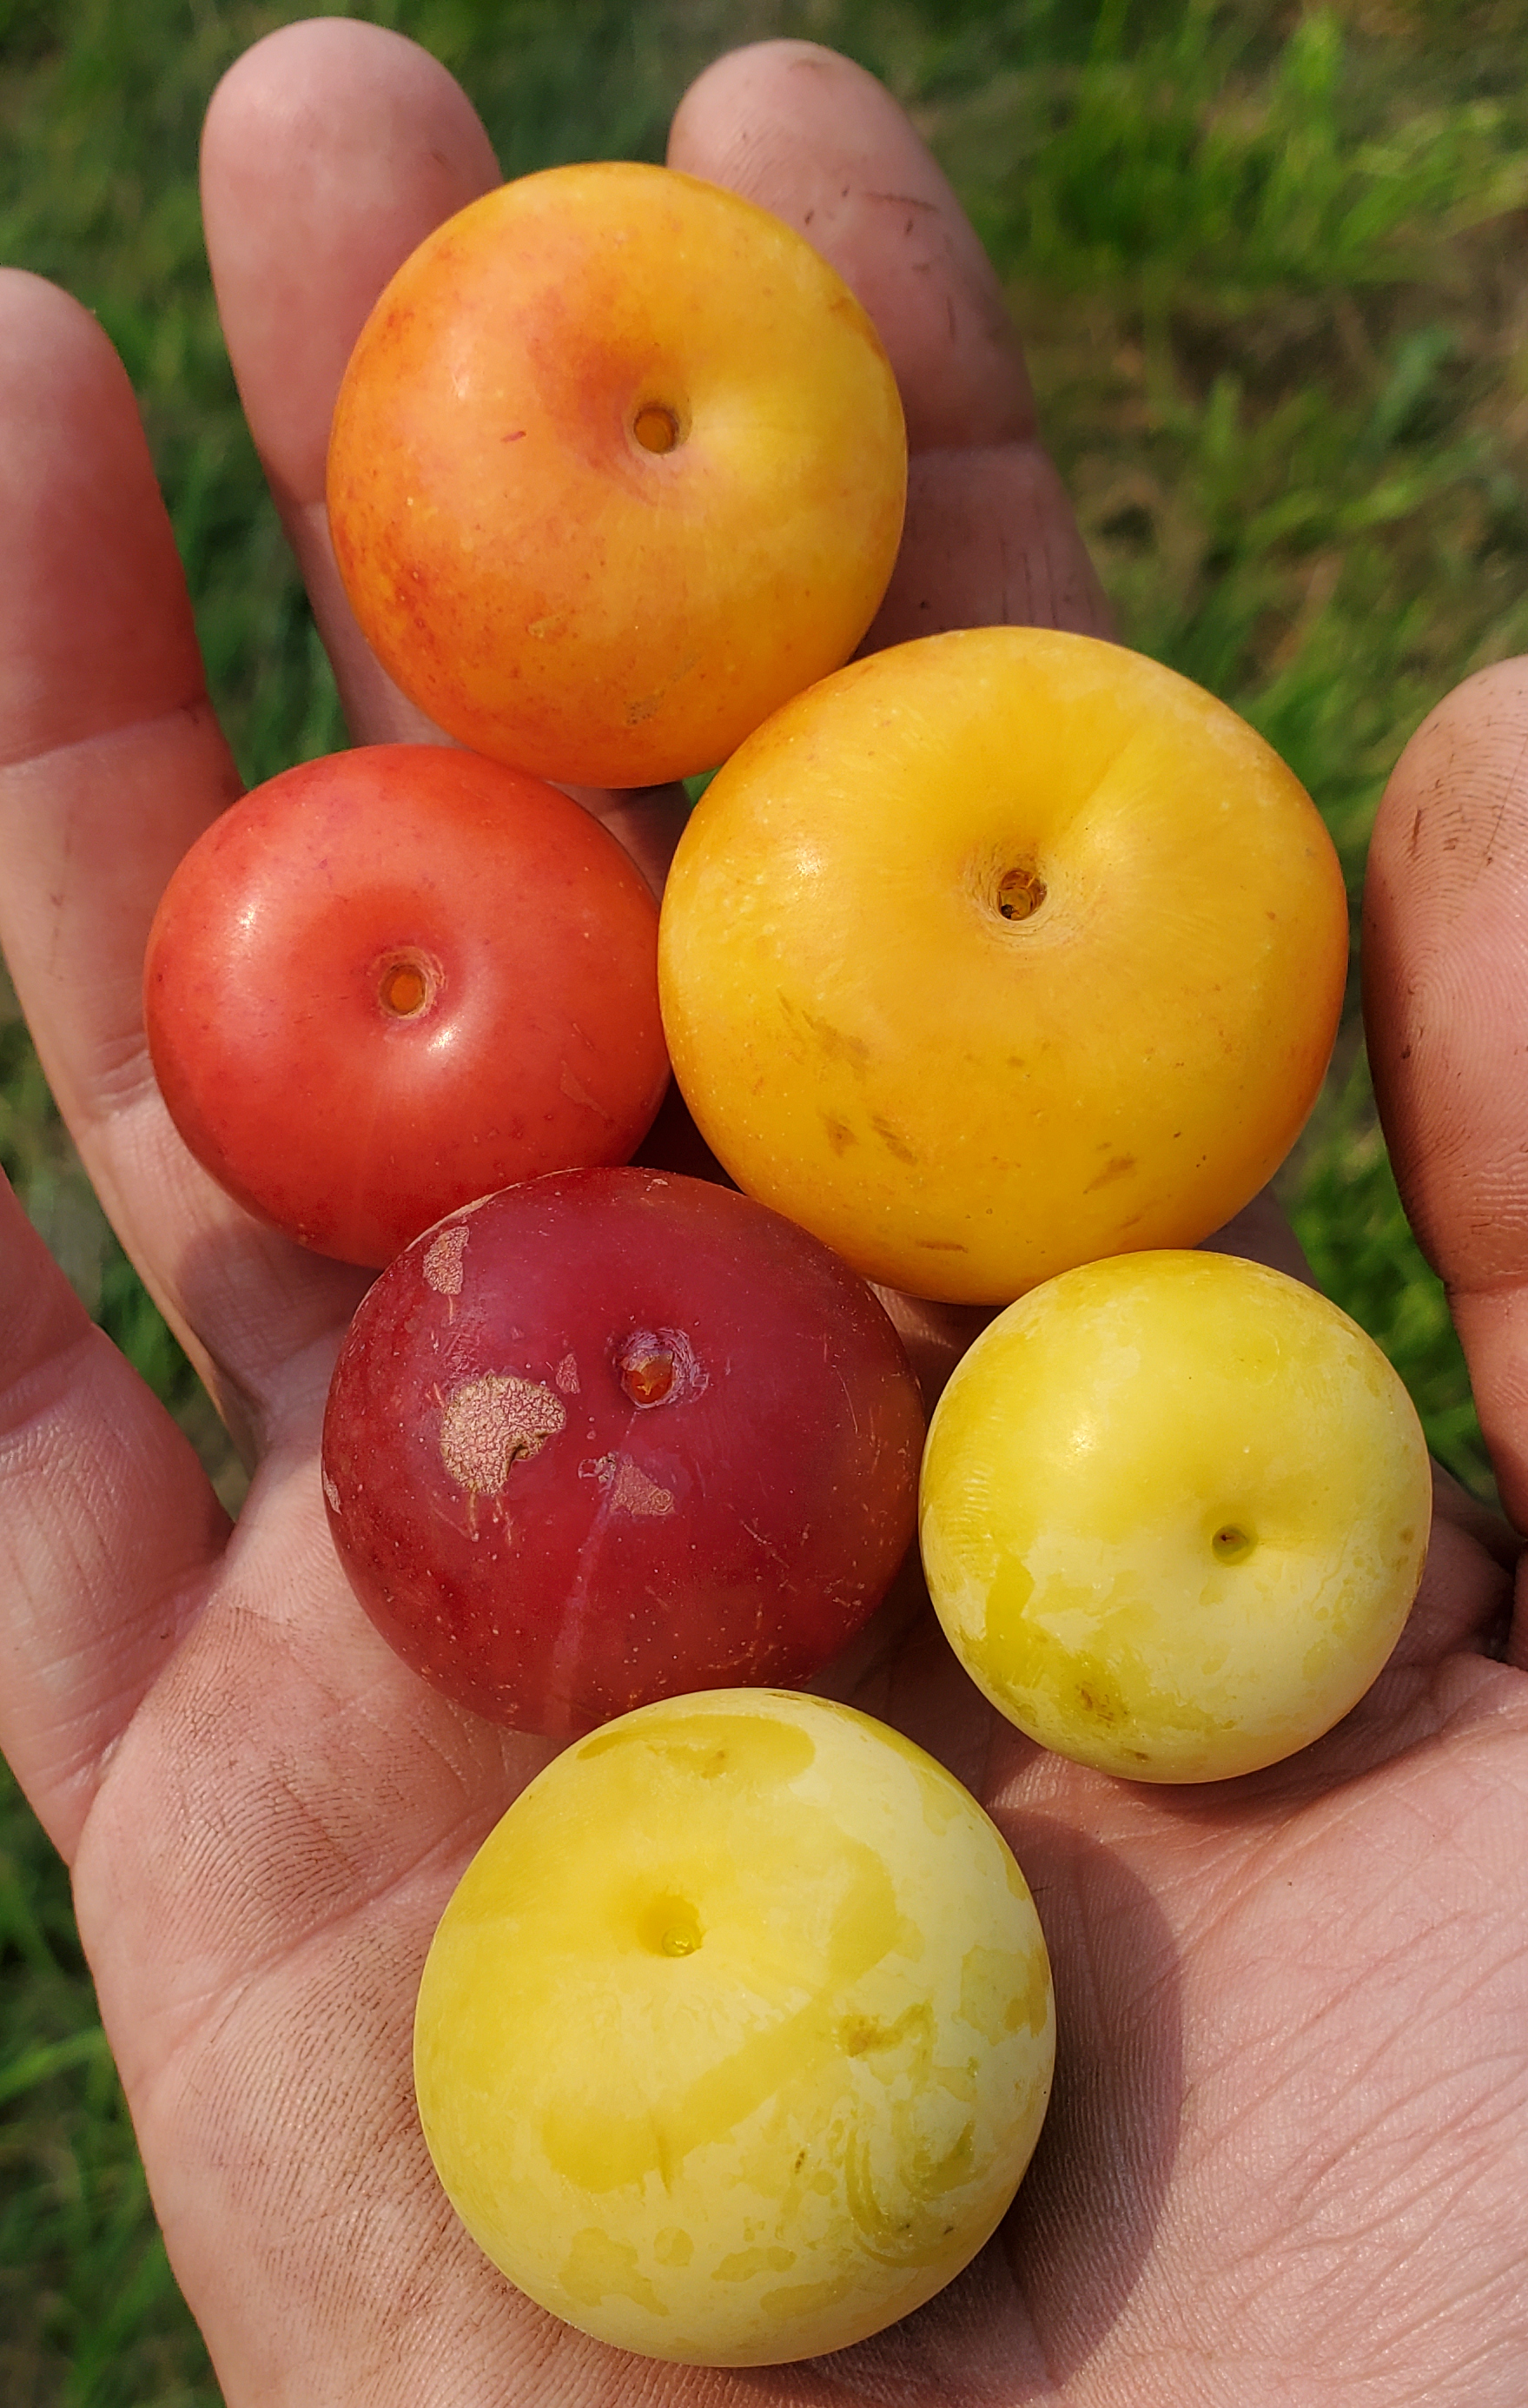 Different colored plums in a hand.